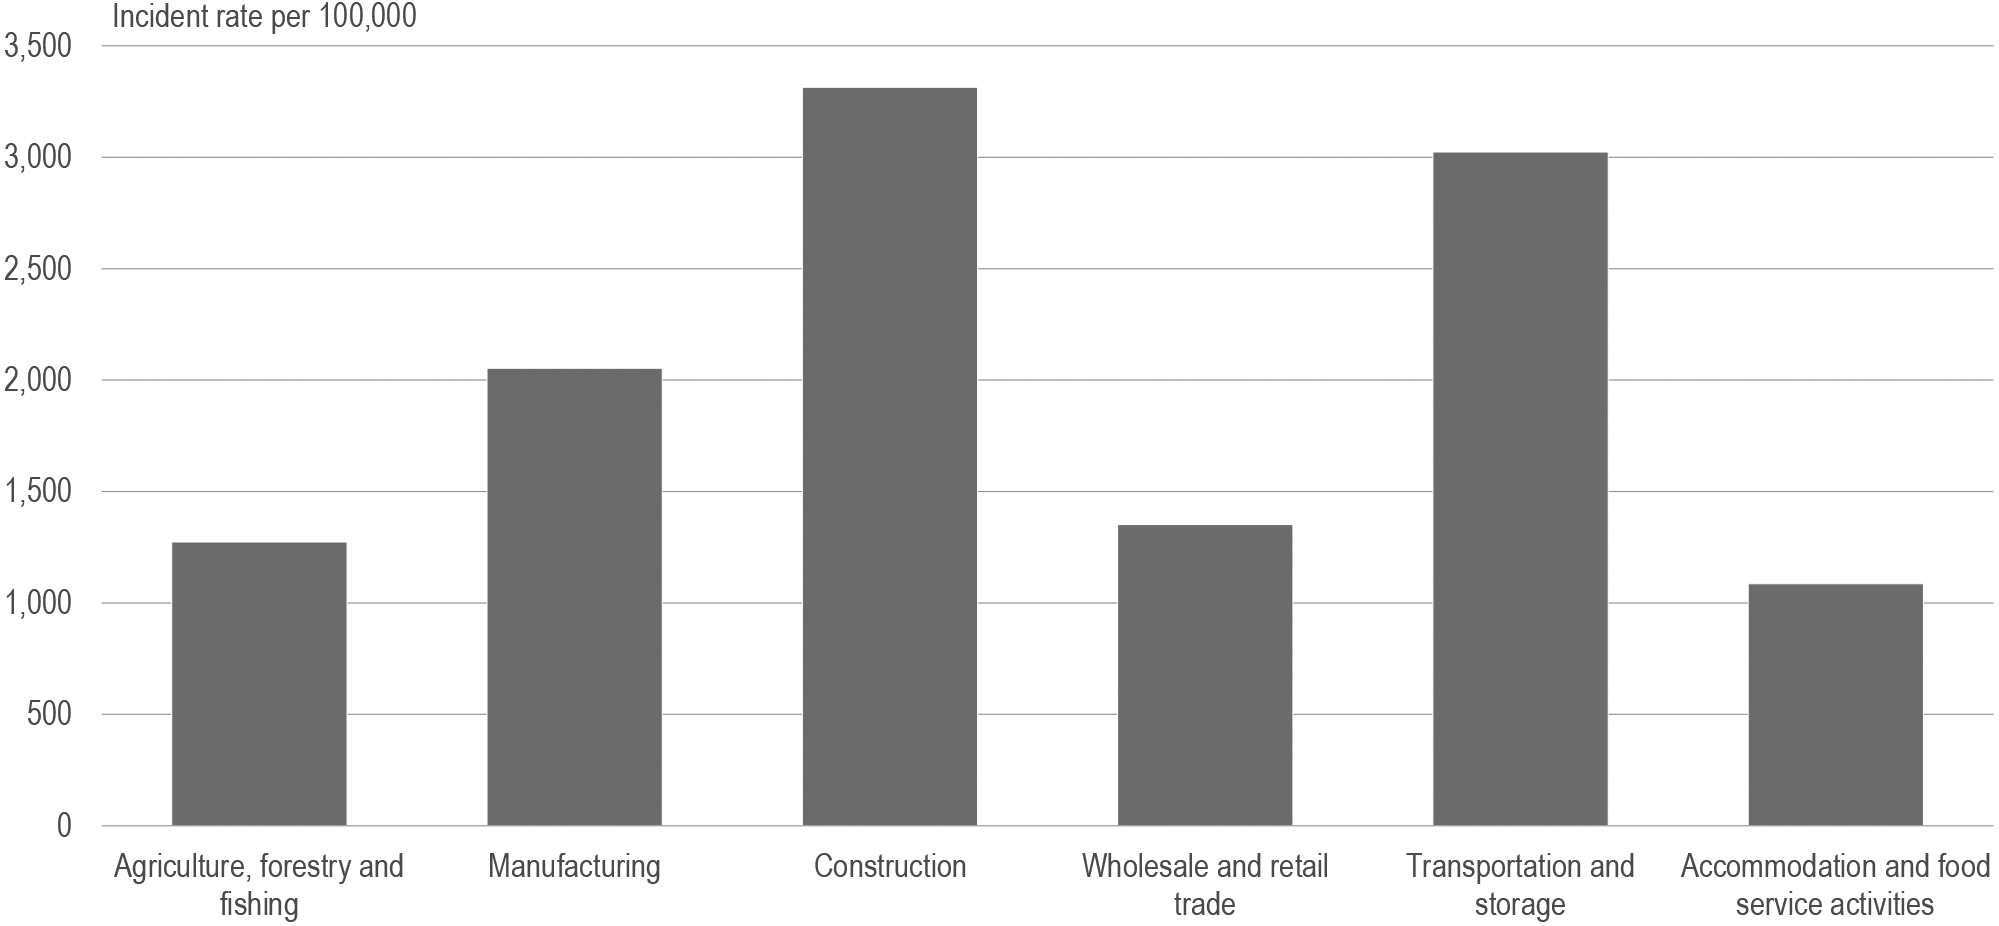 Occupational injuries in Denmark, by types of industry. 2017. Source: Eurostat, Health statistics. Note: Only selected types of industry are shown.